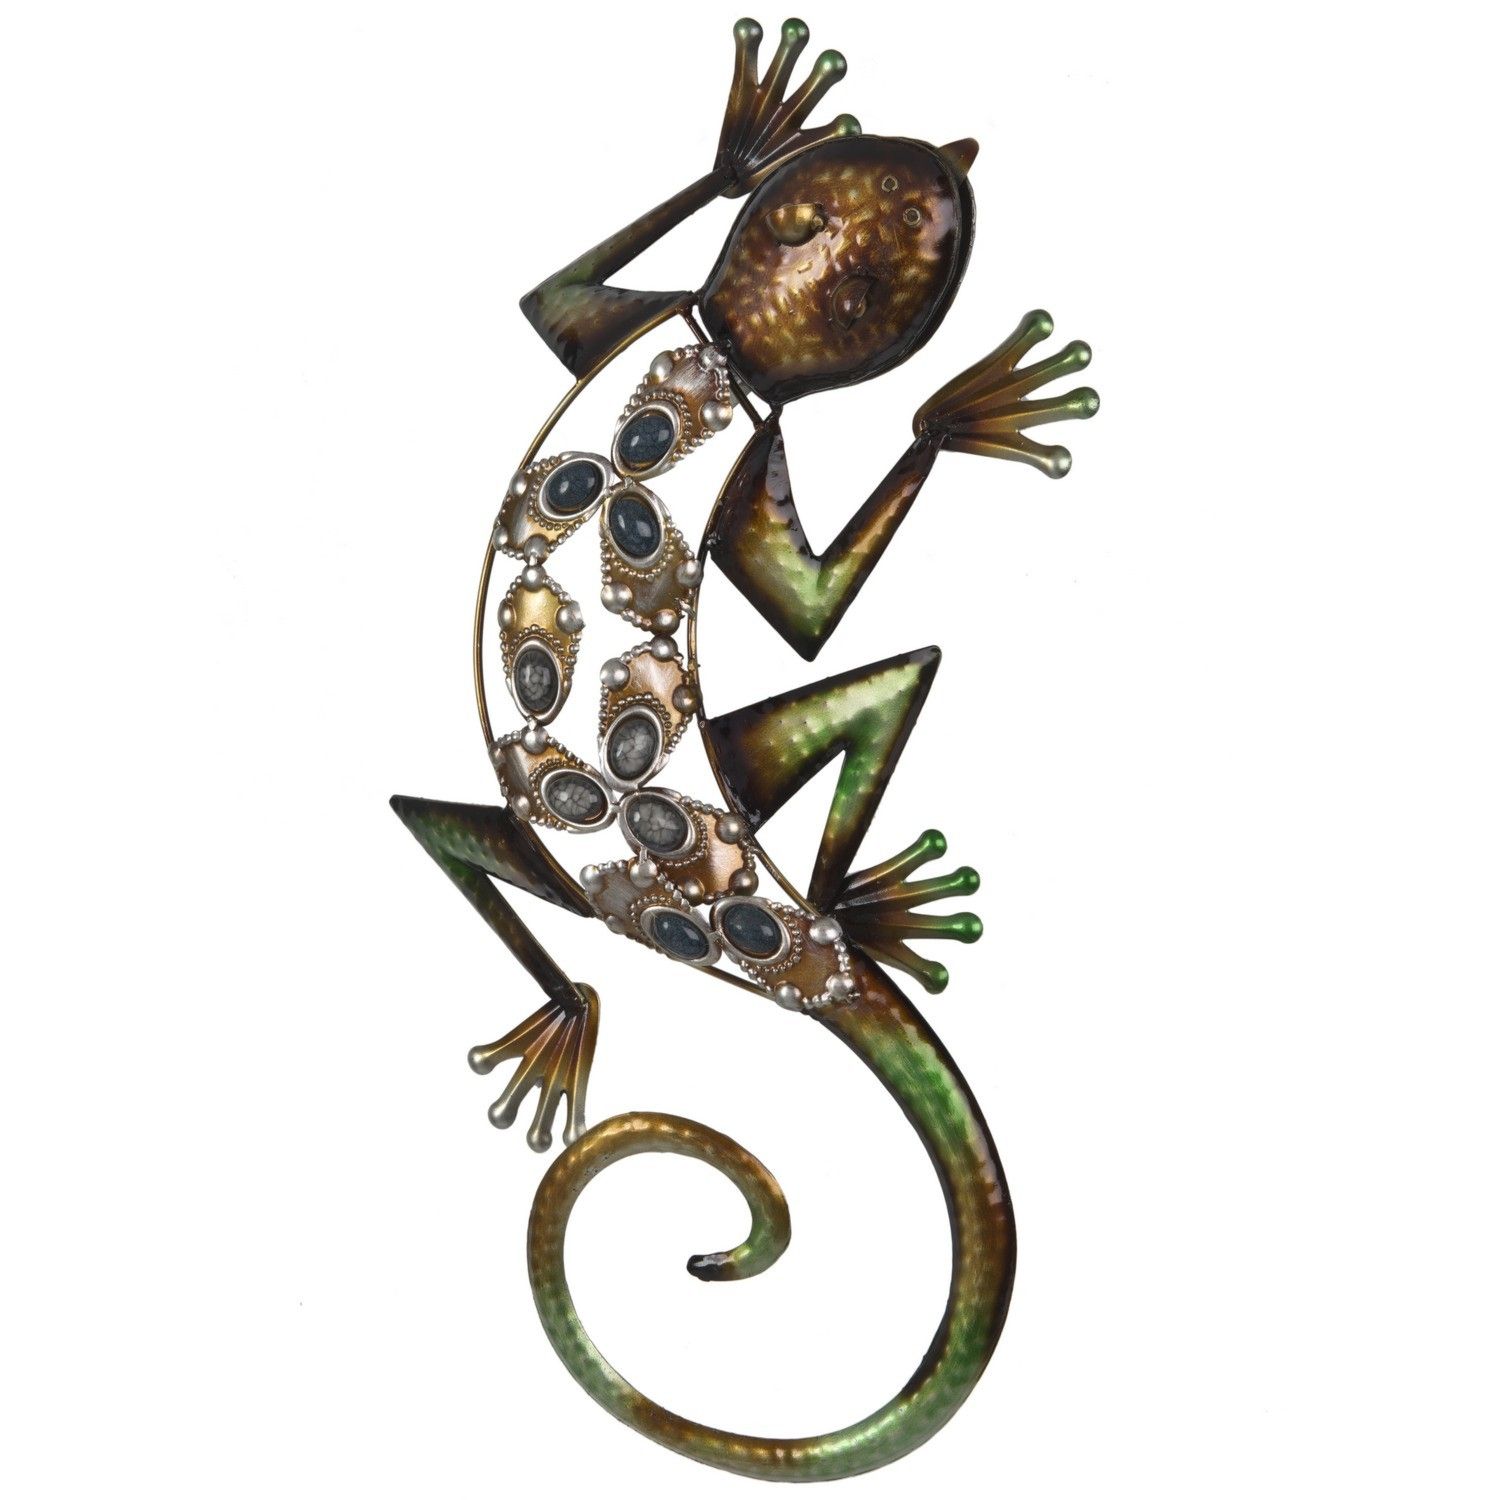 Jewelled Lizard Wall Art Intended For Gecko Wall Decor (View 26 of 30)